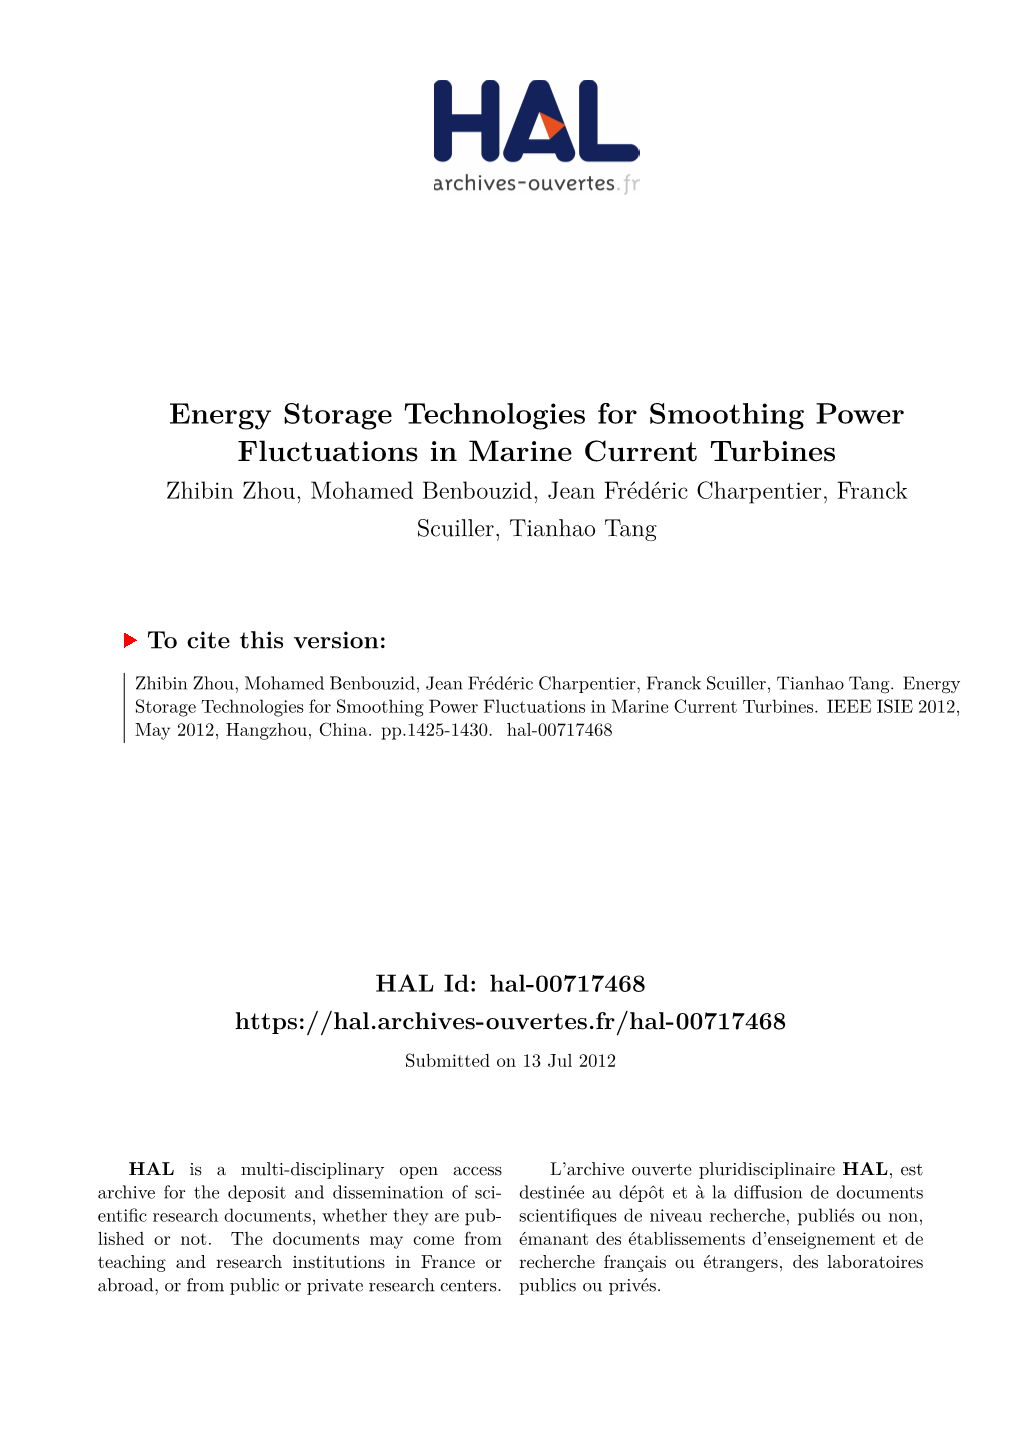 Energy Storage Technologies for Smoothing Power Fluctuations In